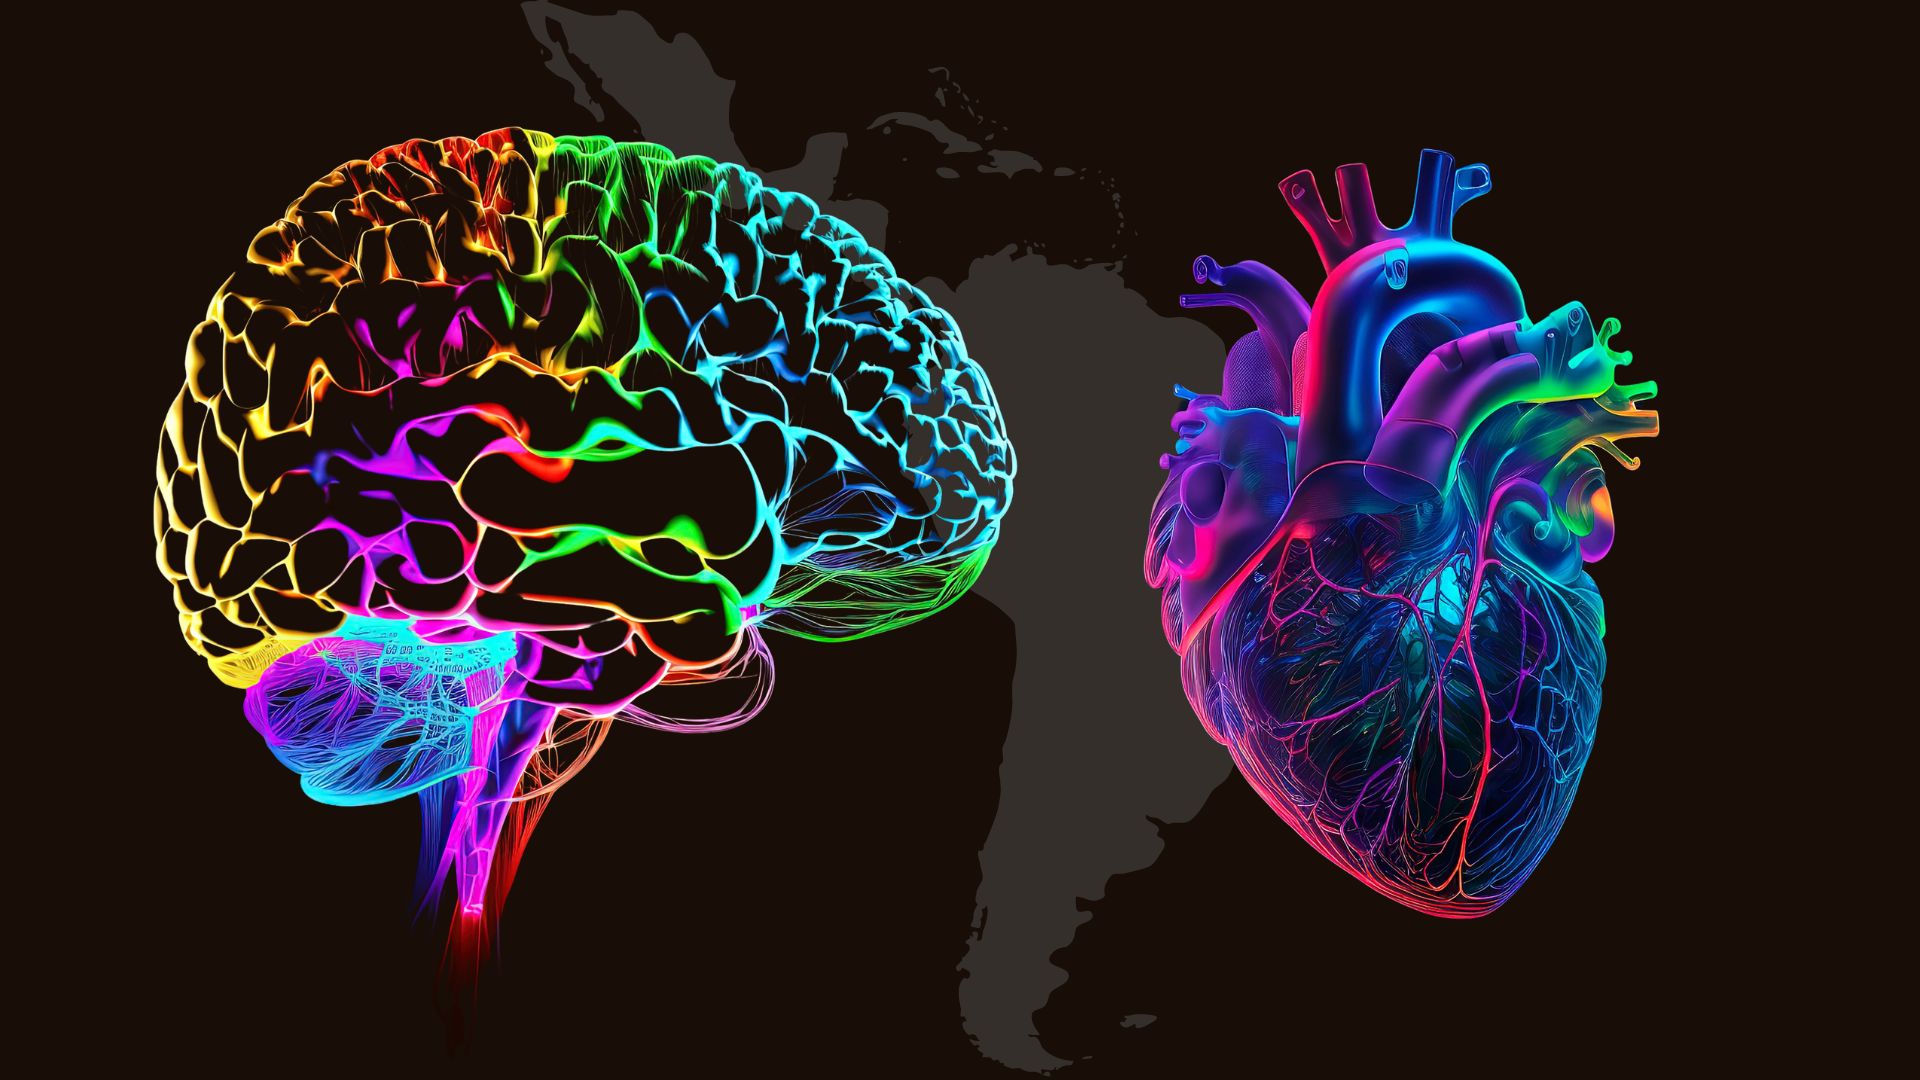 Colorful brain and heart overlaid on map of Latin America